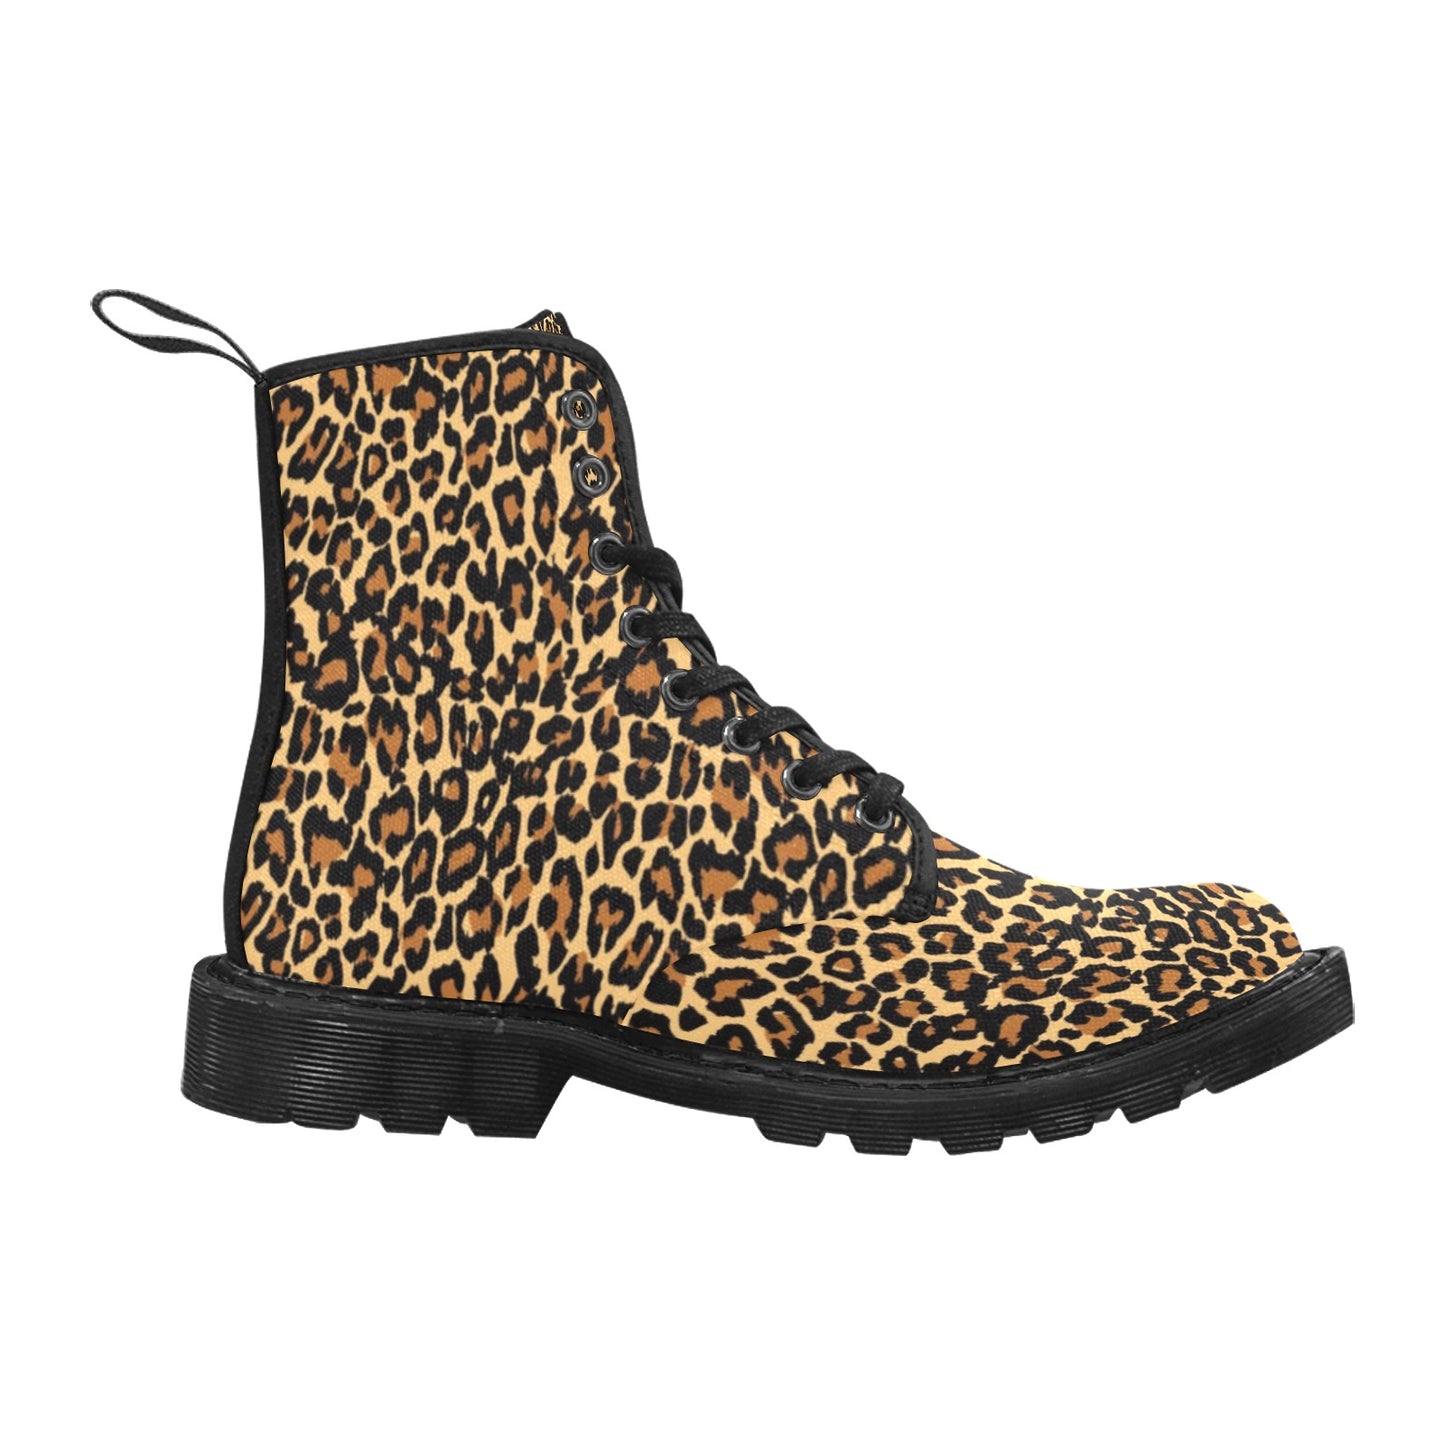 Leopard Women's Boots, Animal Print Vegan Canvas Lace Up Shoes, Black Brown Cheetah Print Army Ankle Combat, Winter Casual Custom Gift Starcove Fashion